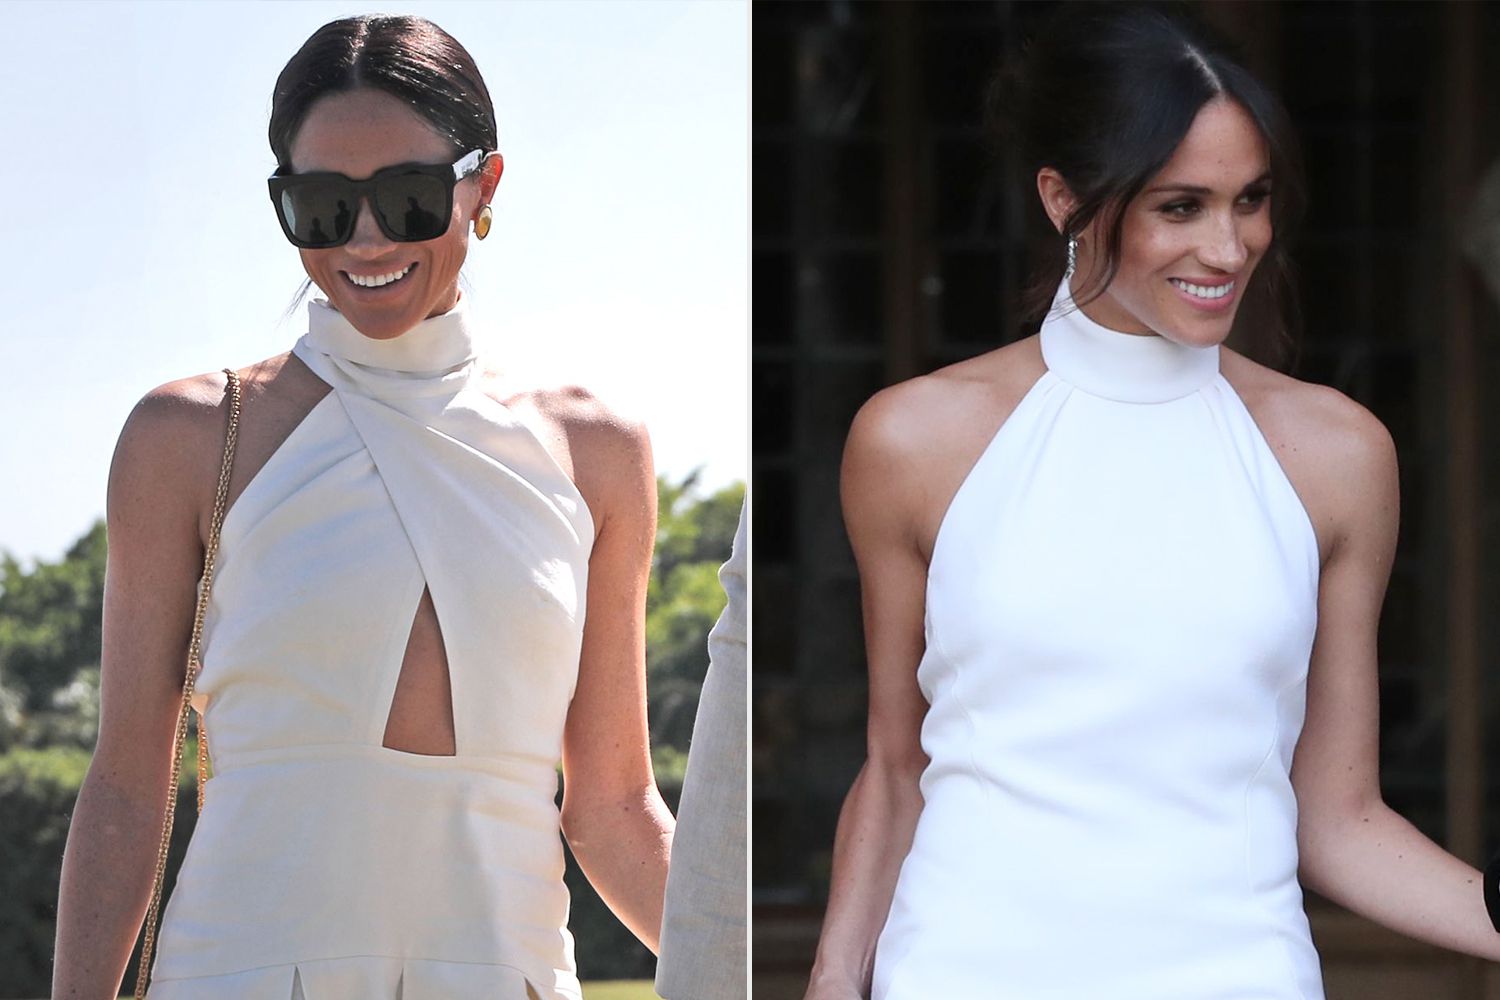 Meghan Markle’s Polo Outfit Was Reminiscent of Royal Wedding Dress [Video]